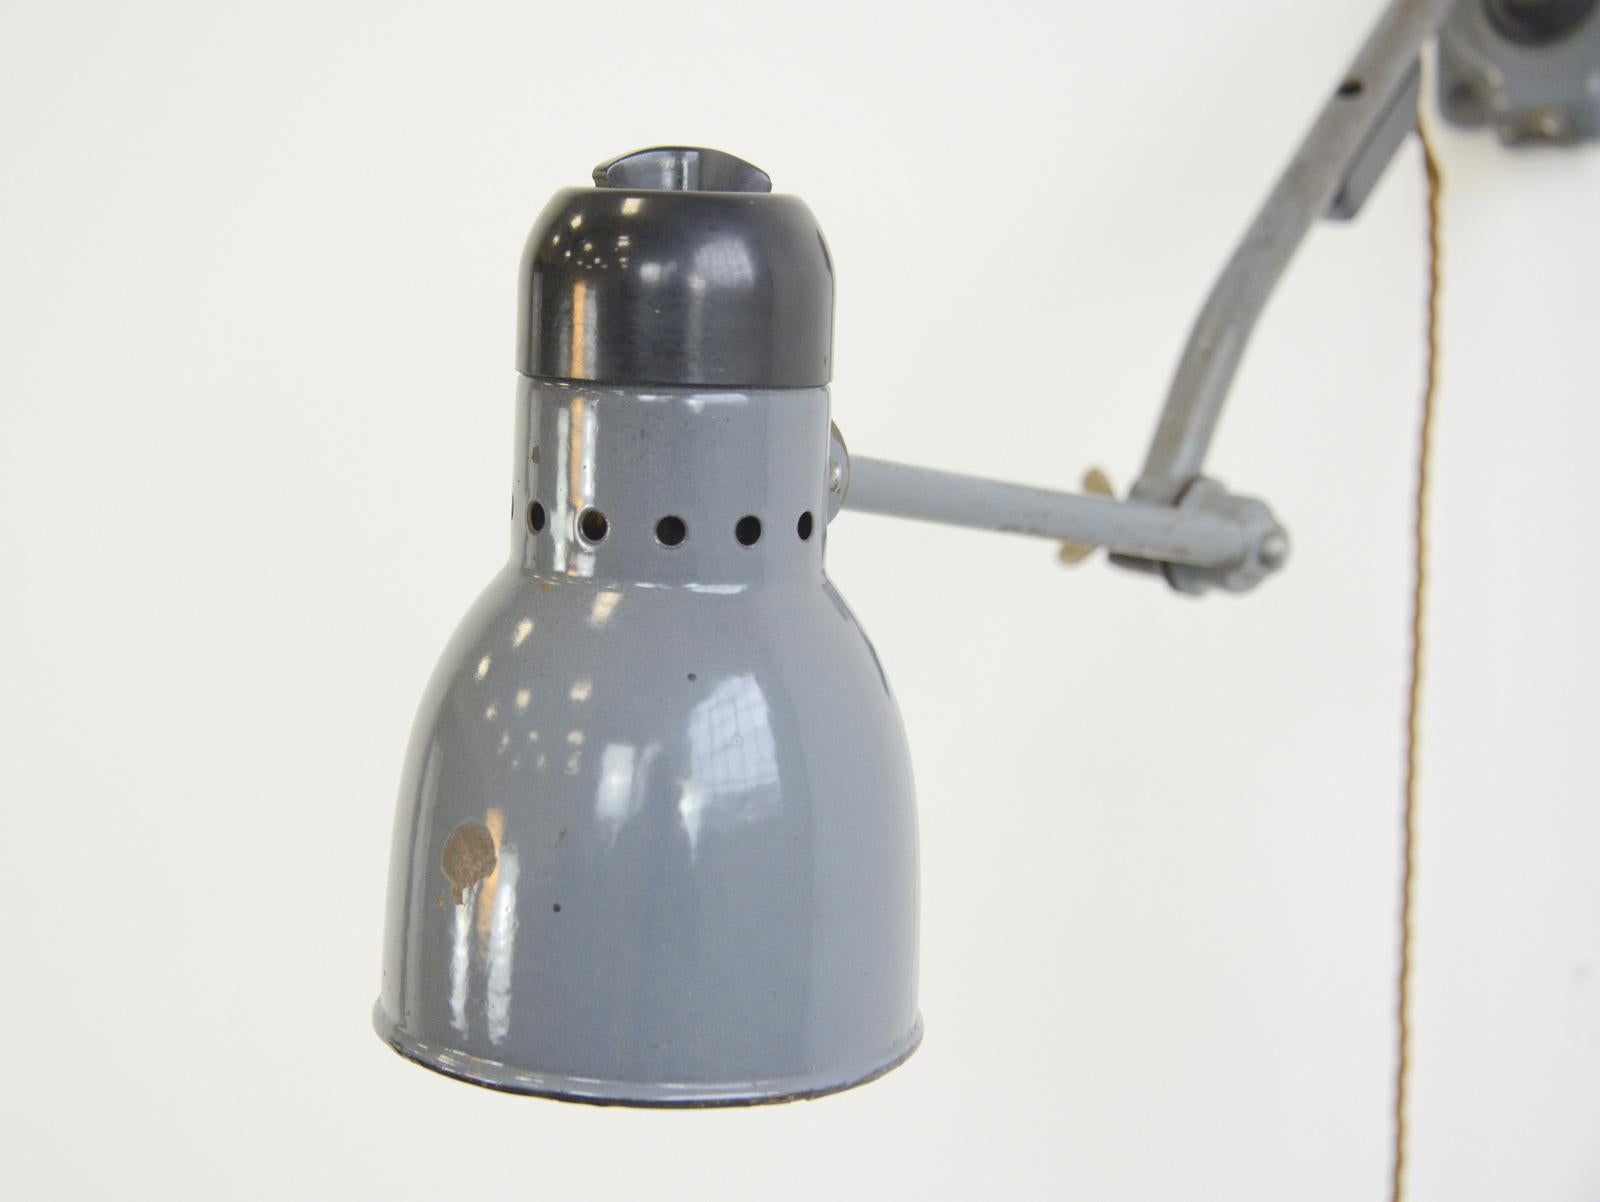 Wall-mounted task lamp by Kandem, circa 1930s

- Vitreous grey enamel shade
- Bakelite switch and head
- Branded Kandem on the Bakelite top
- Takes E27 fitting bulbs
- Made by Korting & Mathiesen
- German, 1930s
- Measures: 12cm wide
-